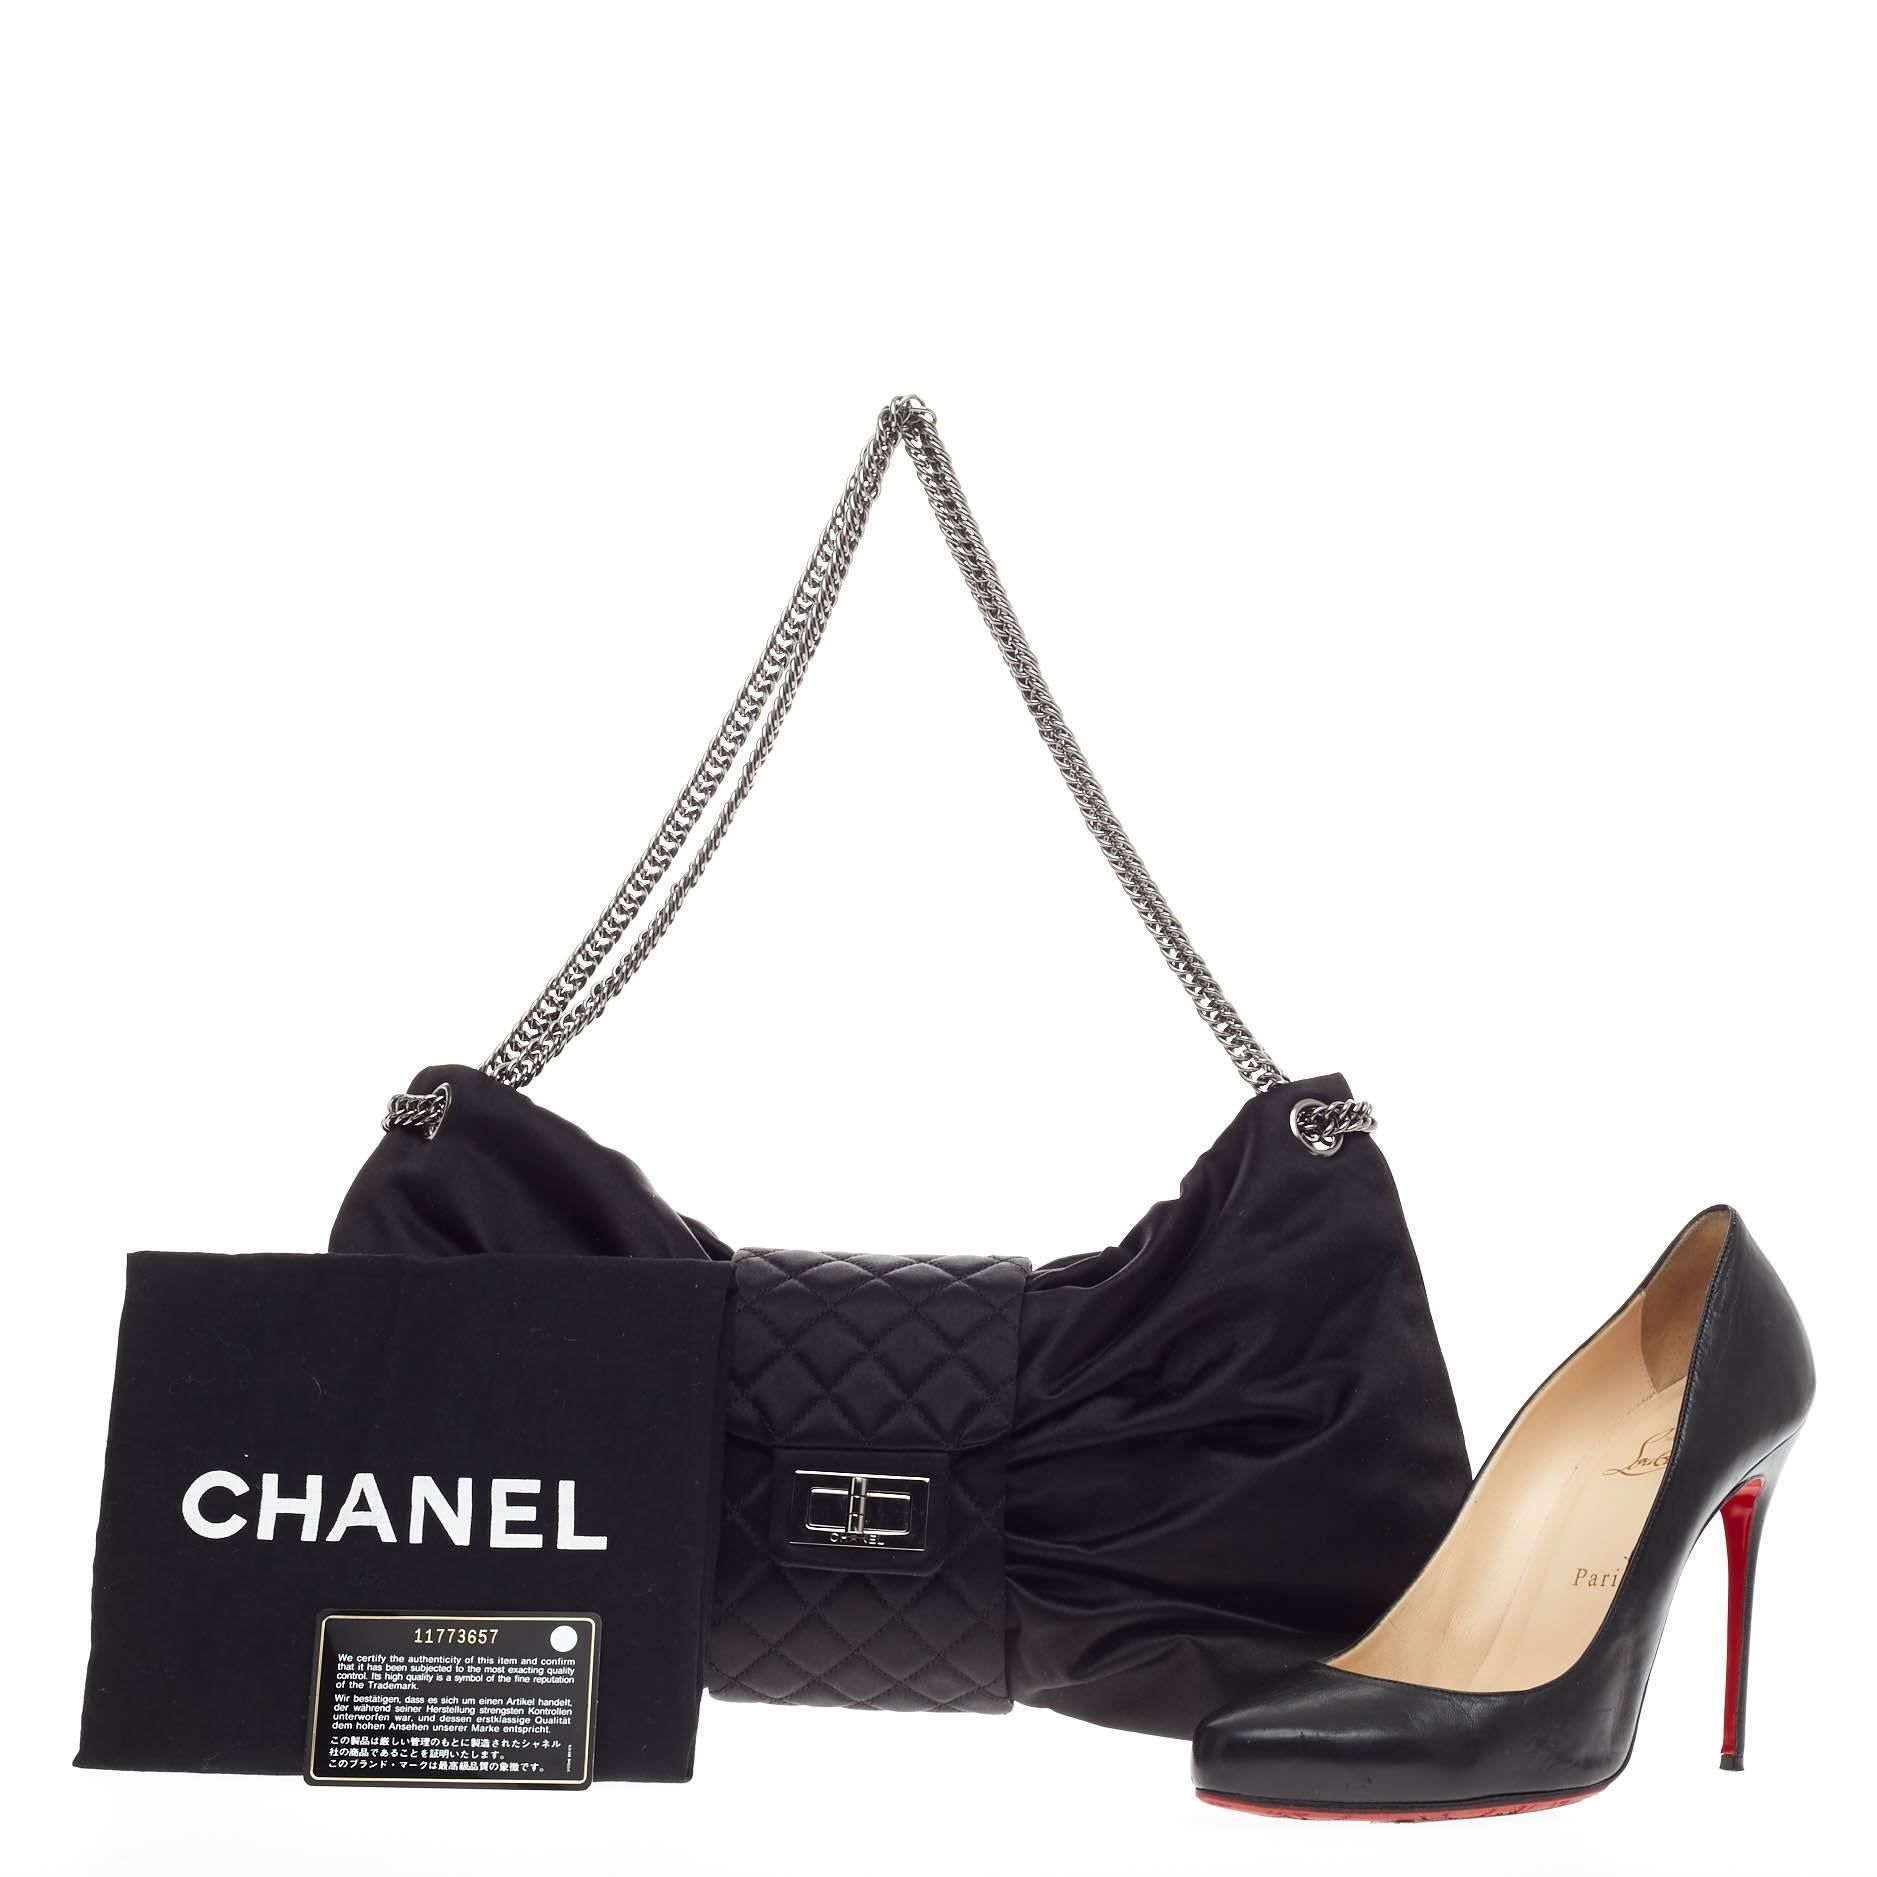 This authentic Chanel Bow Bag Satin Large presented in the brand's Spring/Summer 2008 Collection is  stylish and luxurious in design perfect for day to evening look. Crafted in soft black satin, this unique bow bag features Chanel's signature